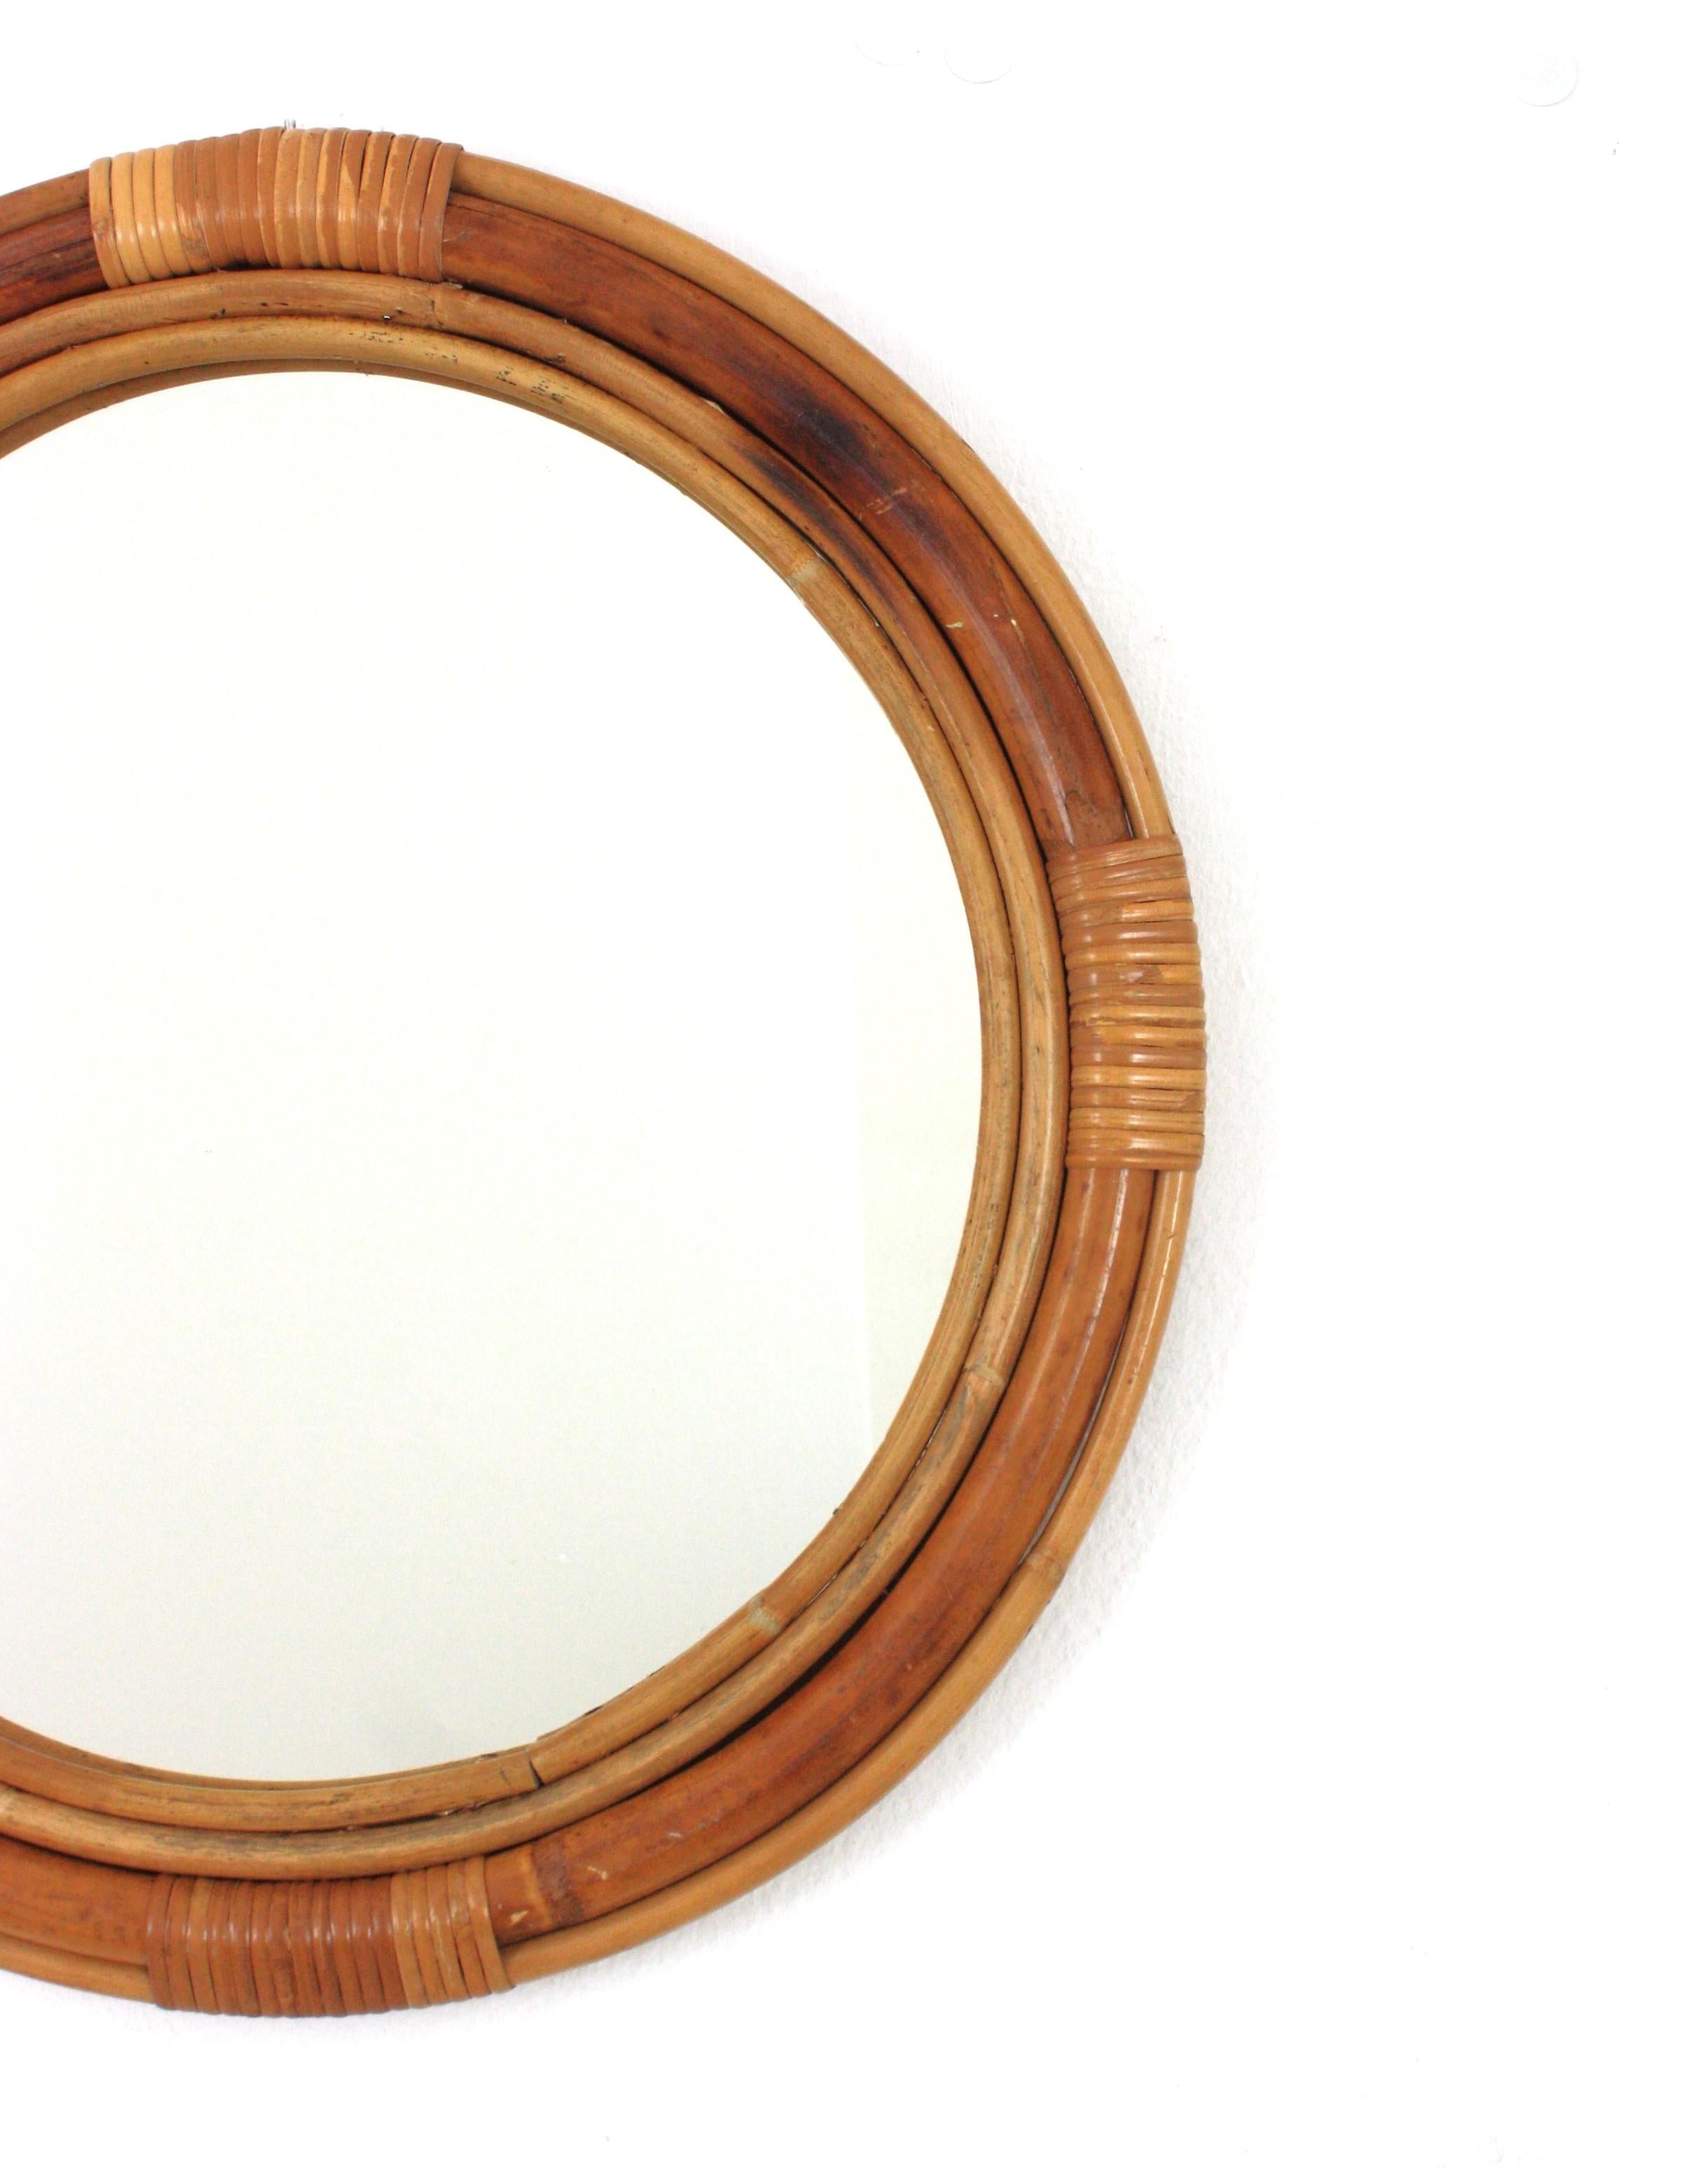 Spanish Rattan Bamboo Round Wall Mirror, 1950s For Sale 1